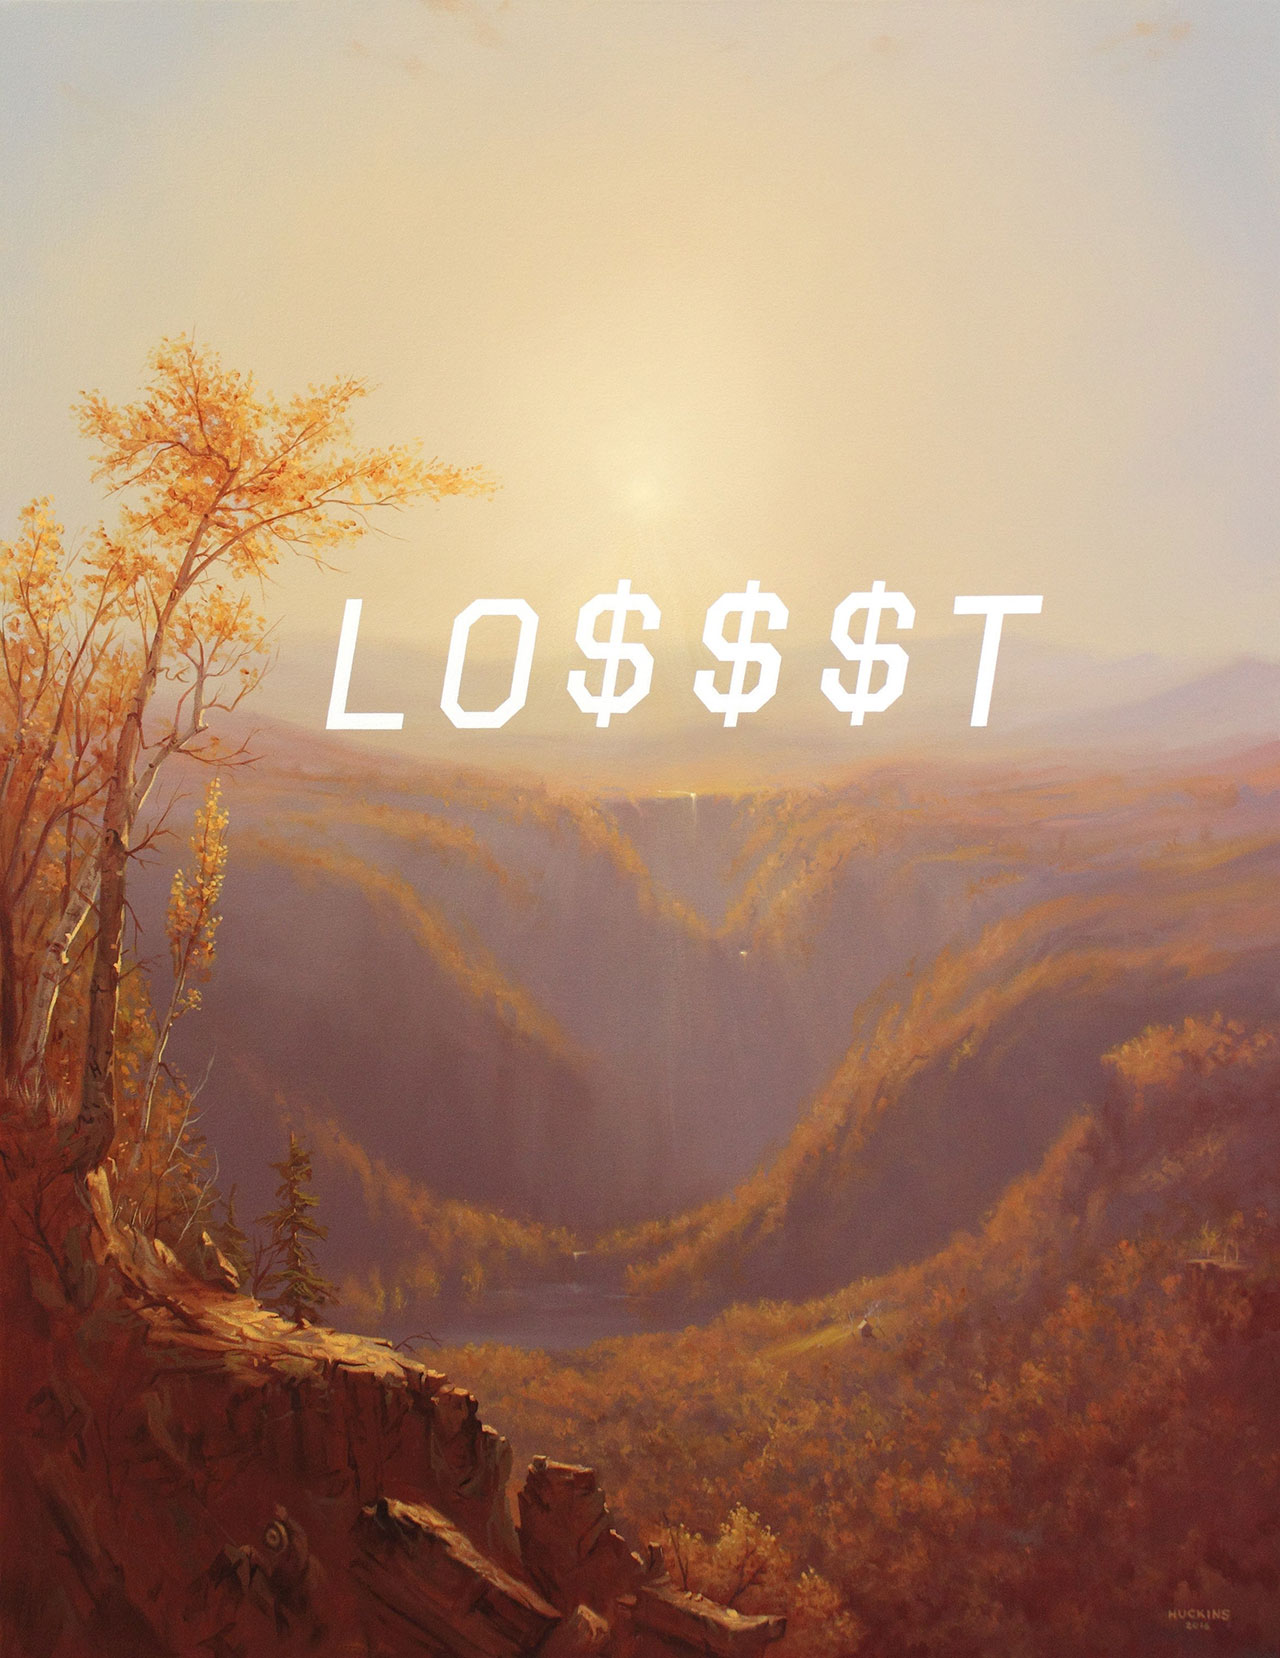 Shawn Huckins, A Gorge In The Mountains: Lost, acrylic on canvas, 36 x 28 in (91 x 71 cm), 2016. Private collection.